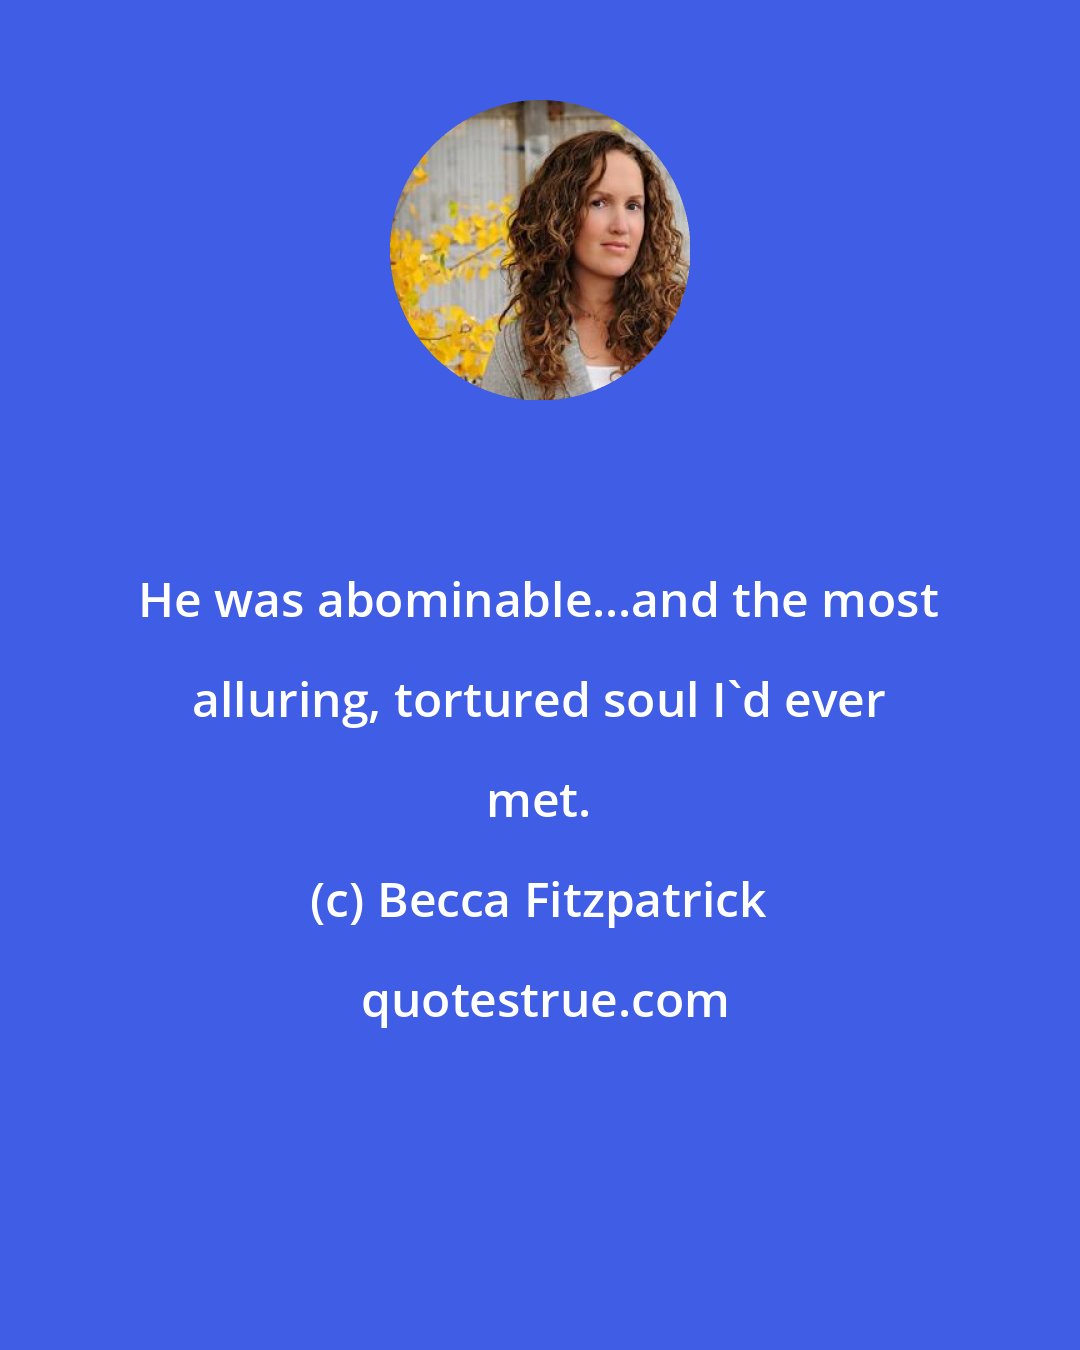 Becca Fitzpatrick: He was abominable...and the most alluring, tortured soul I'd ever met.